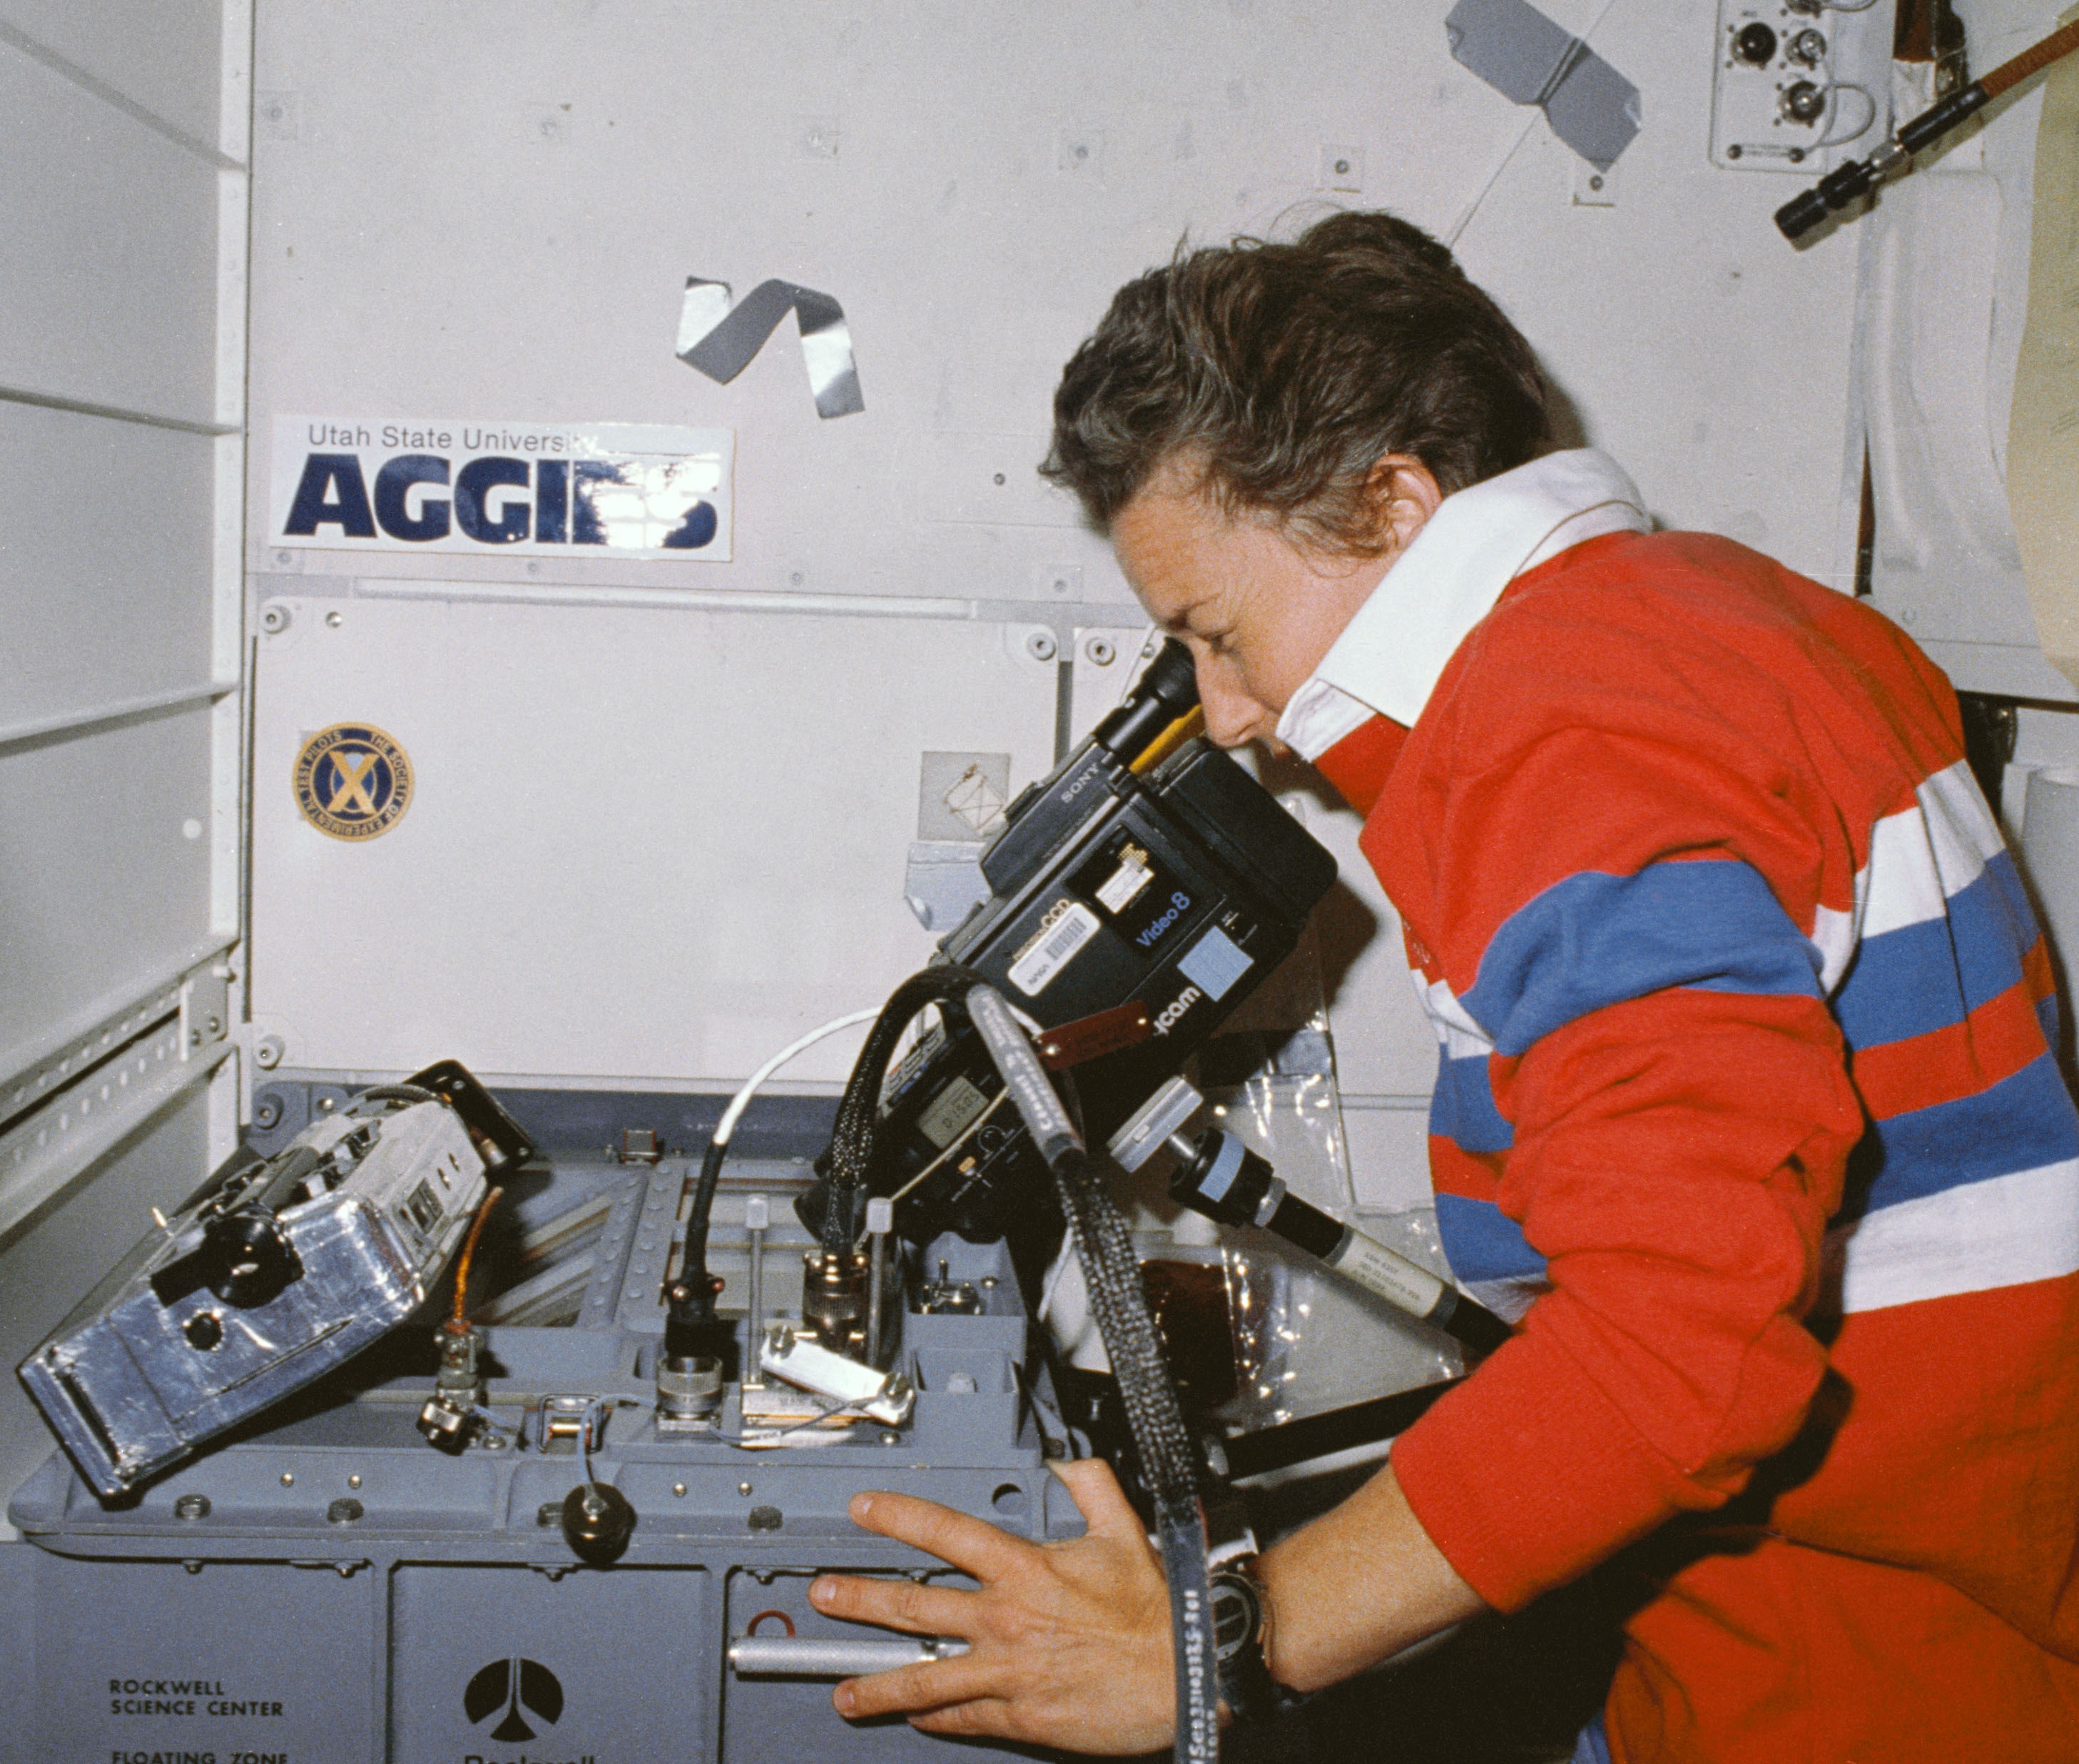 NASA Space Technology Mary L. Lop videotapes the event of an experiment in the Fluids Experiment Apparatus